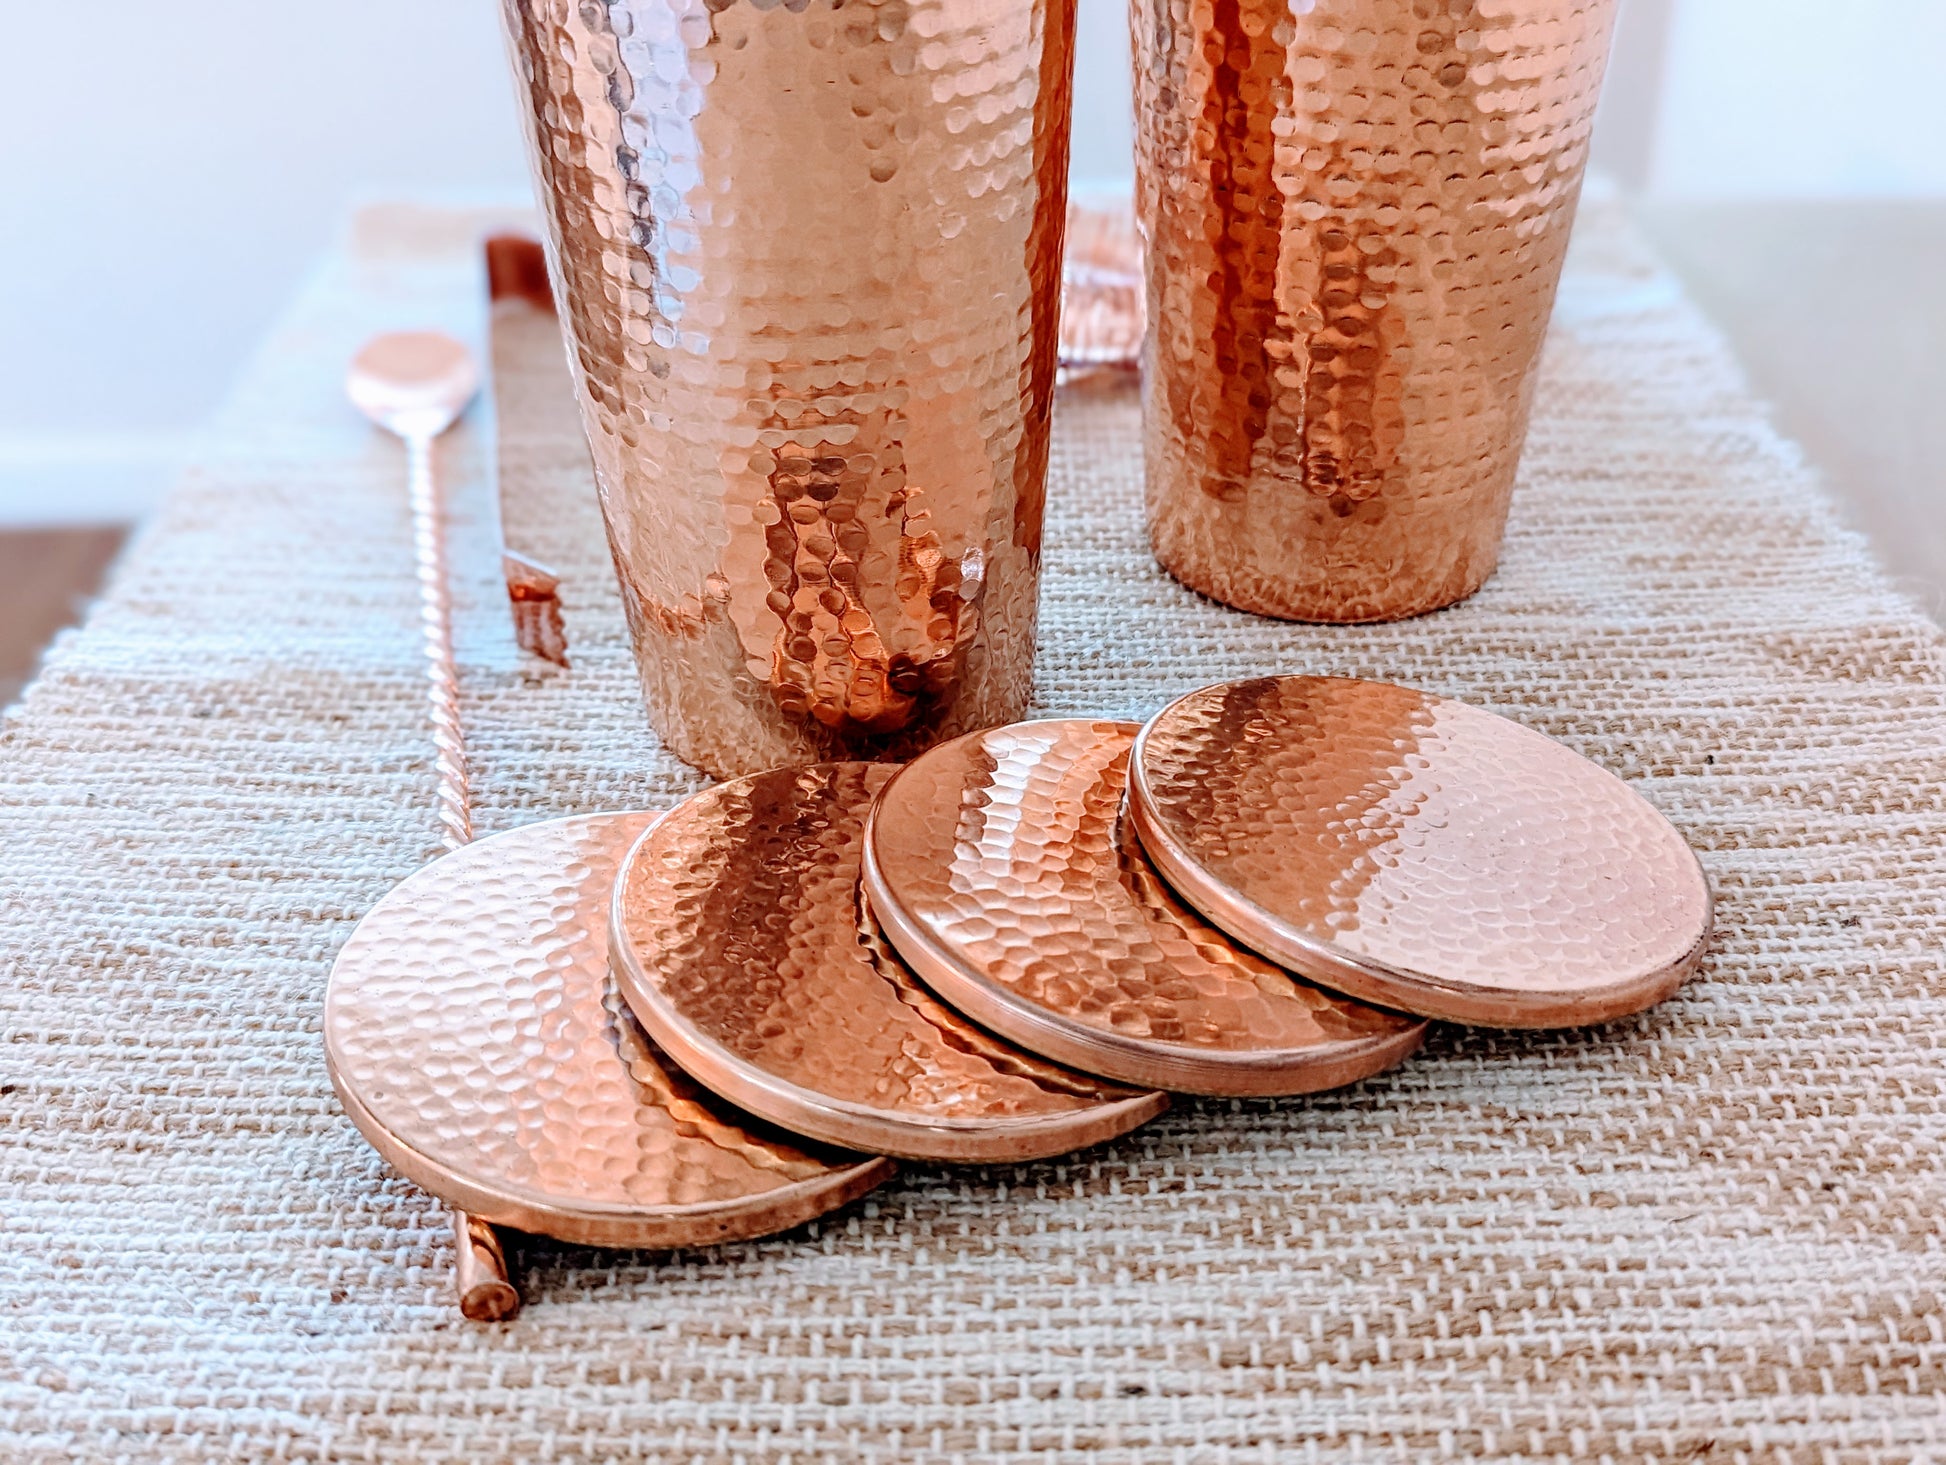 Shop Stunning Solid Brass, Copper, or Nickel Coasters - Perfect